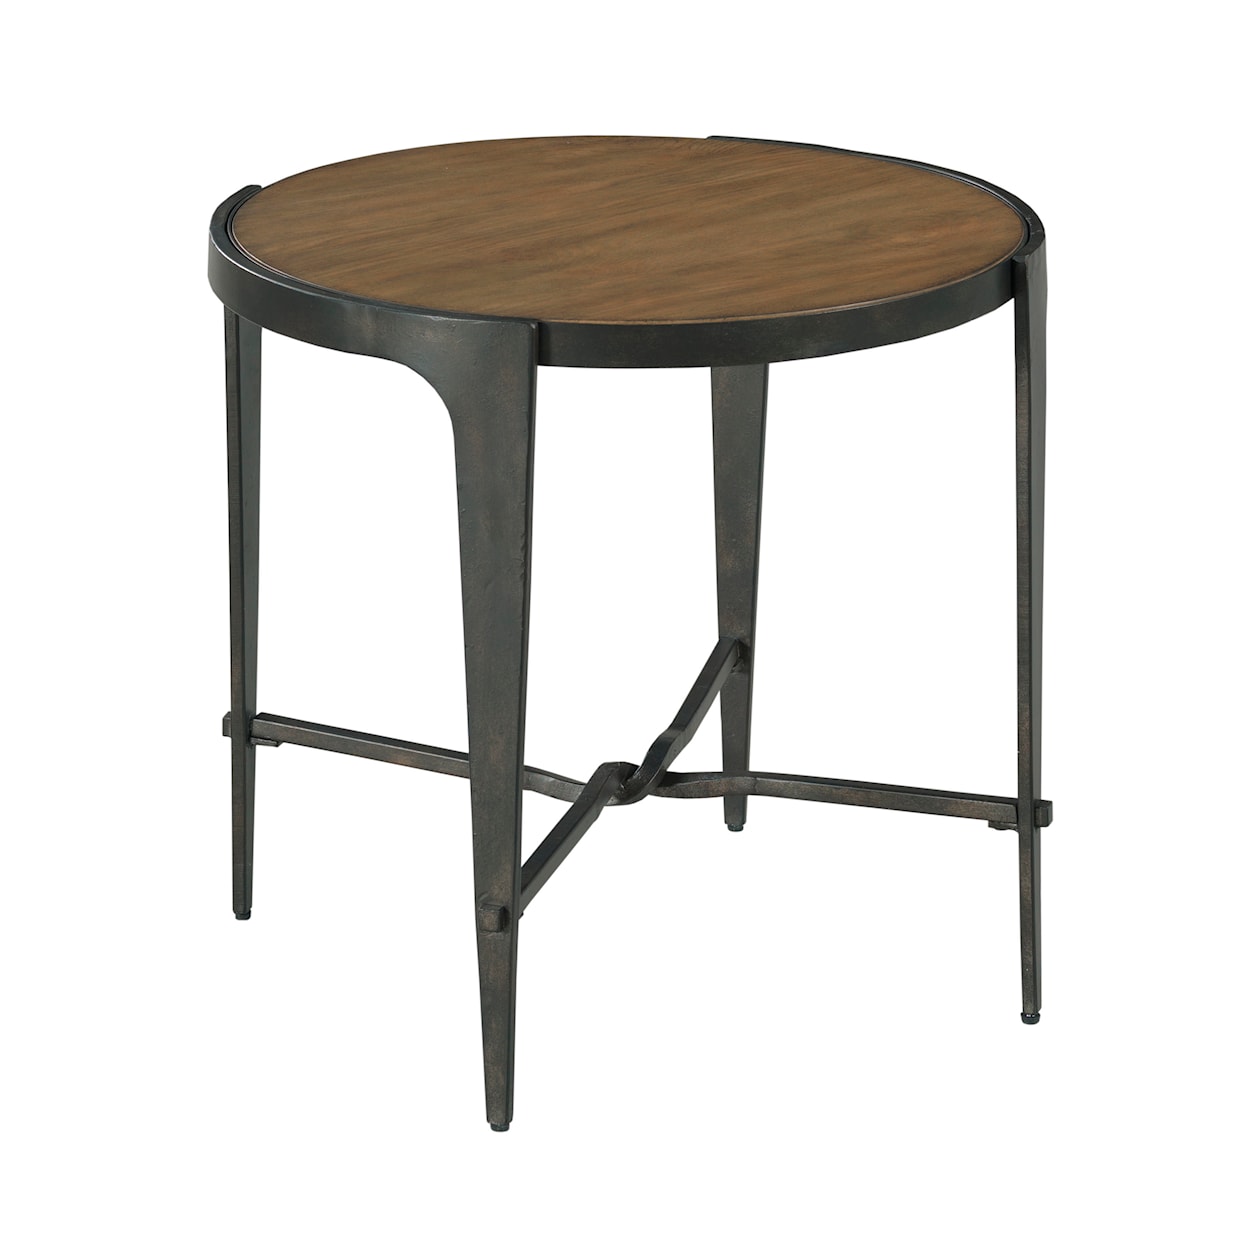 Hammary Olmsted Round End Table